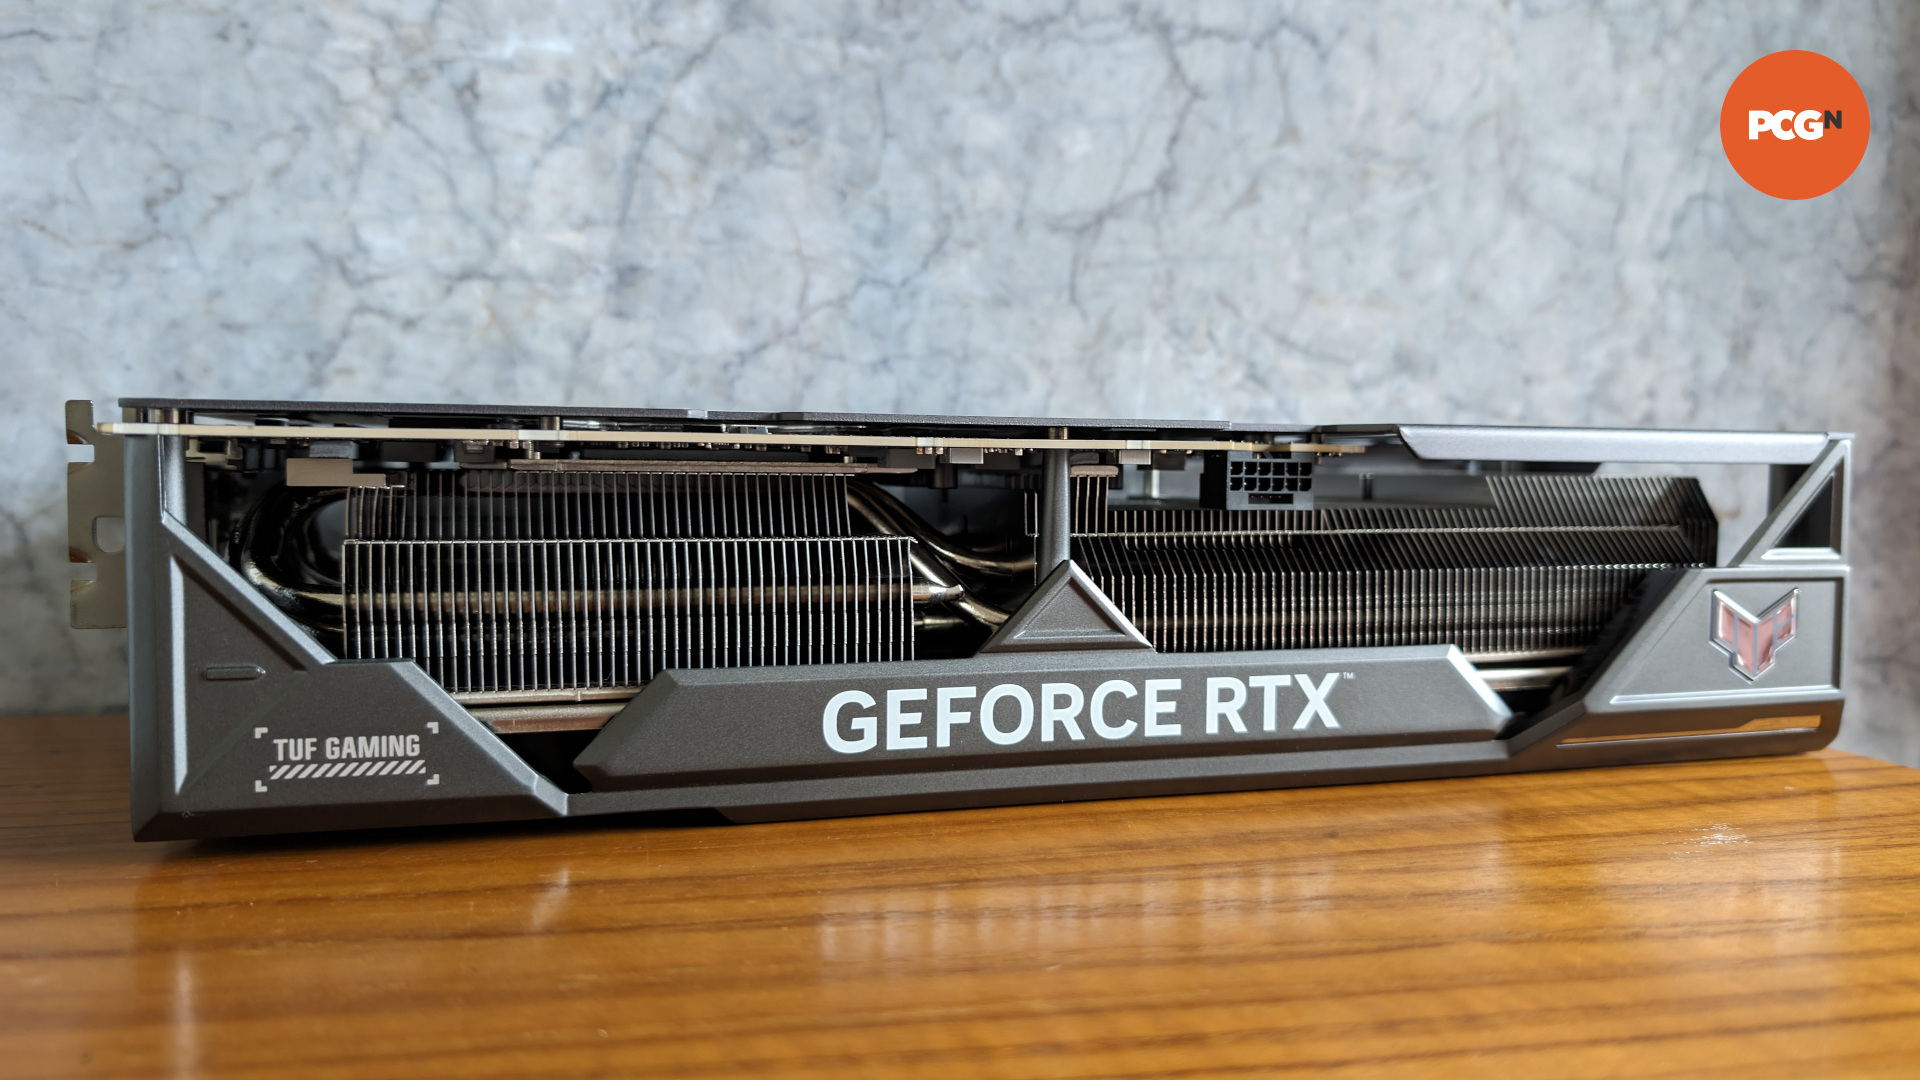 The side of the Asus TUF Gaming GeForce RTX 4080 Super